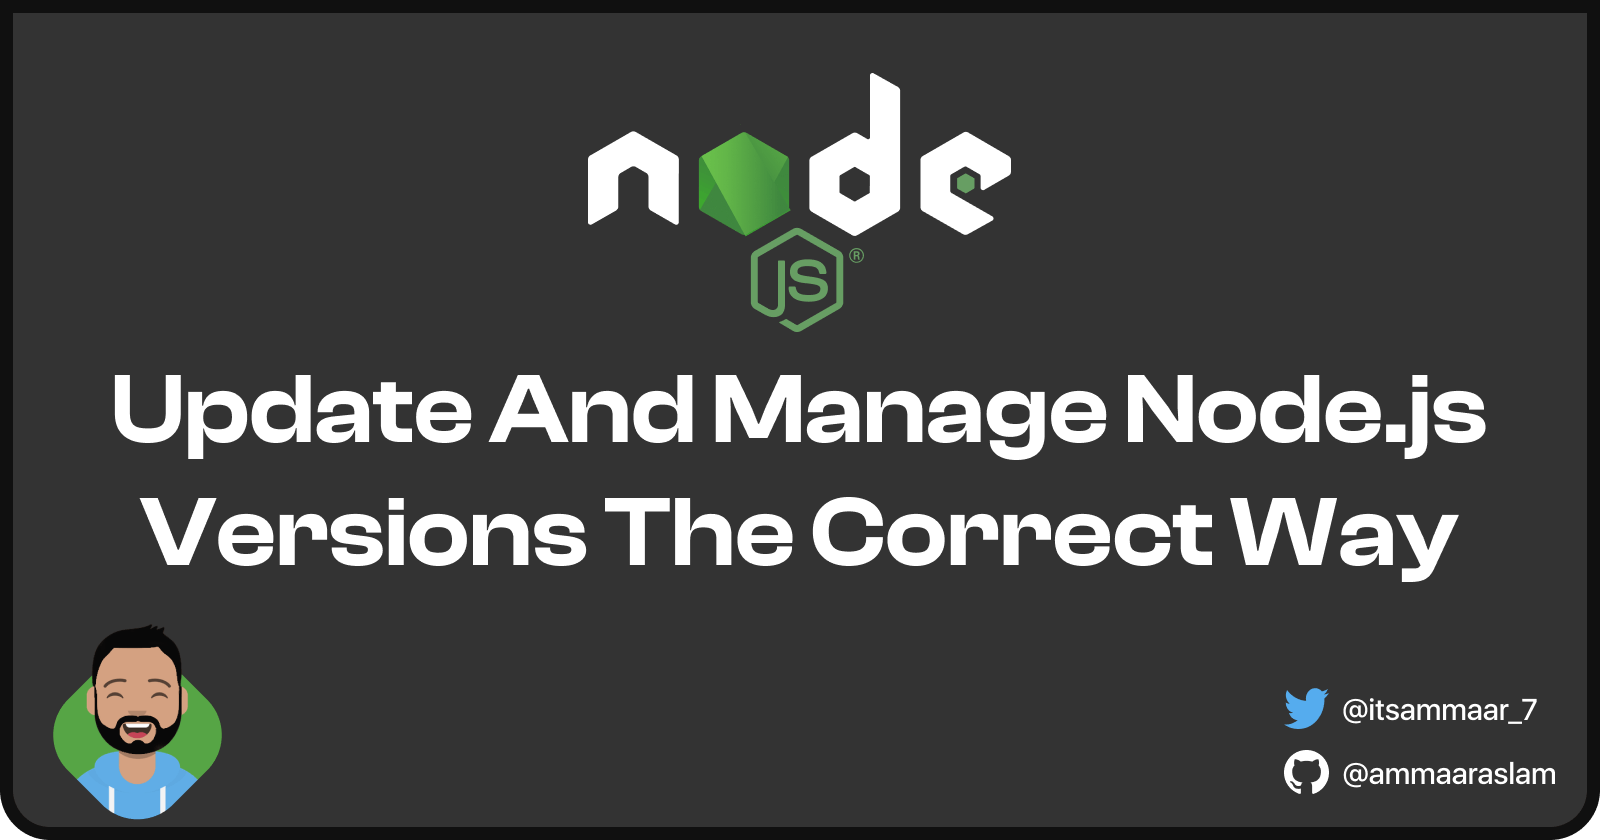 Update And Manage Node.js Versions The Correct Way